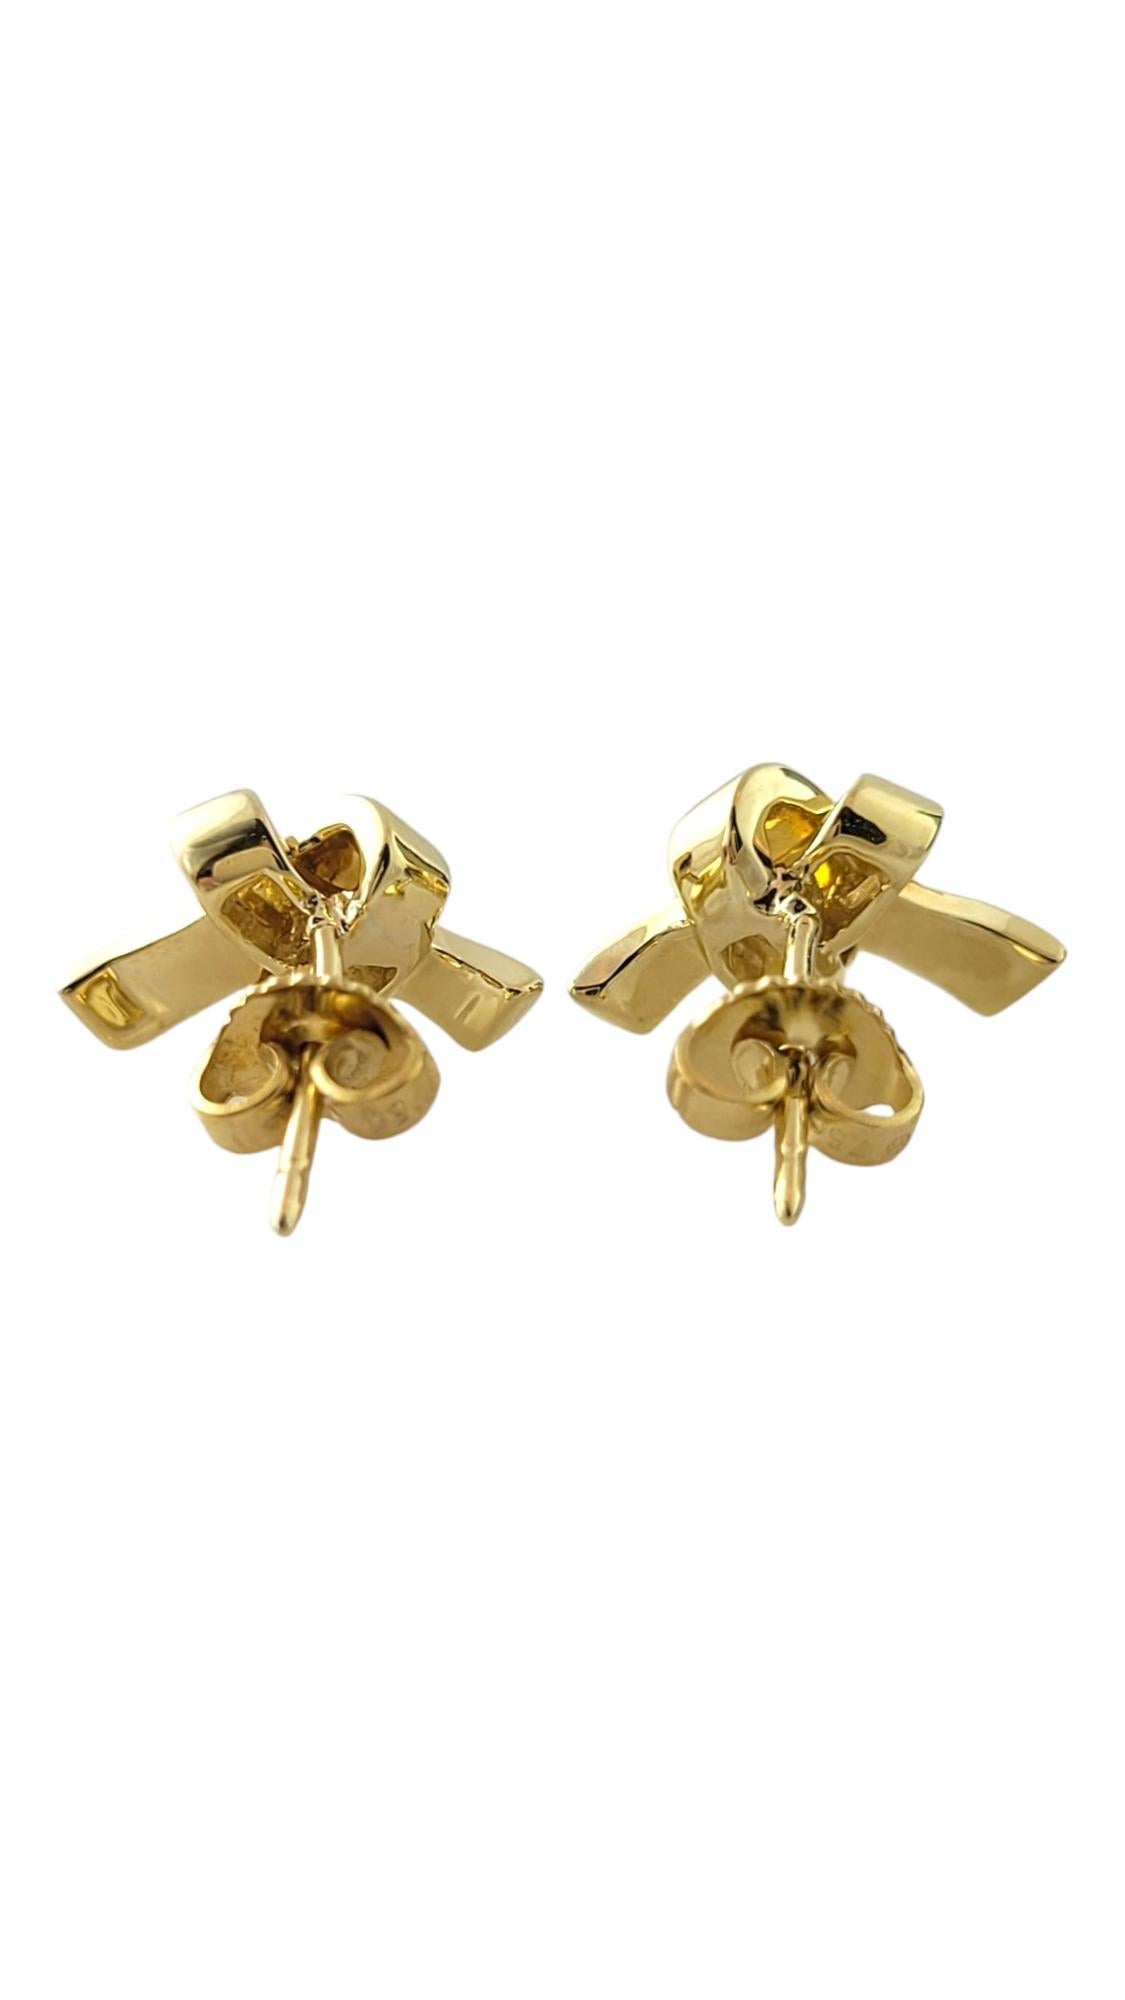 18K Yellow Gold Bow Stud Earrings #16874 In Good Condition For Sale In Washington Depot, CT